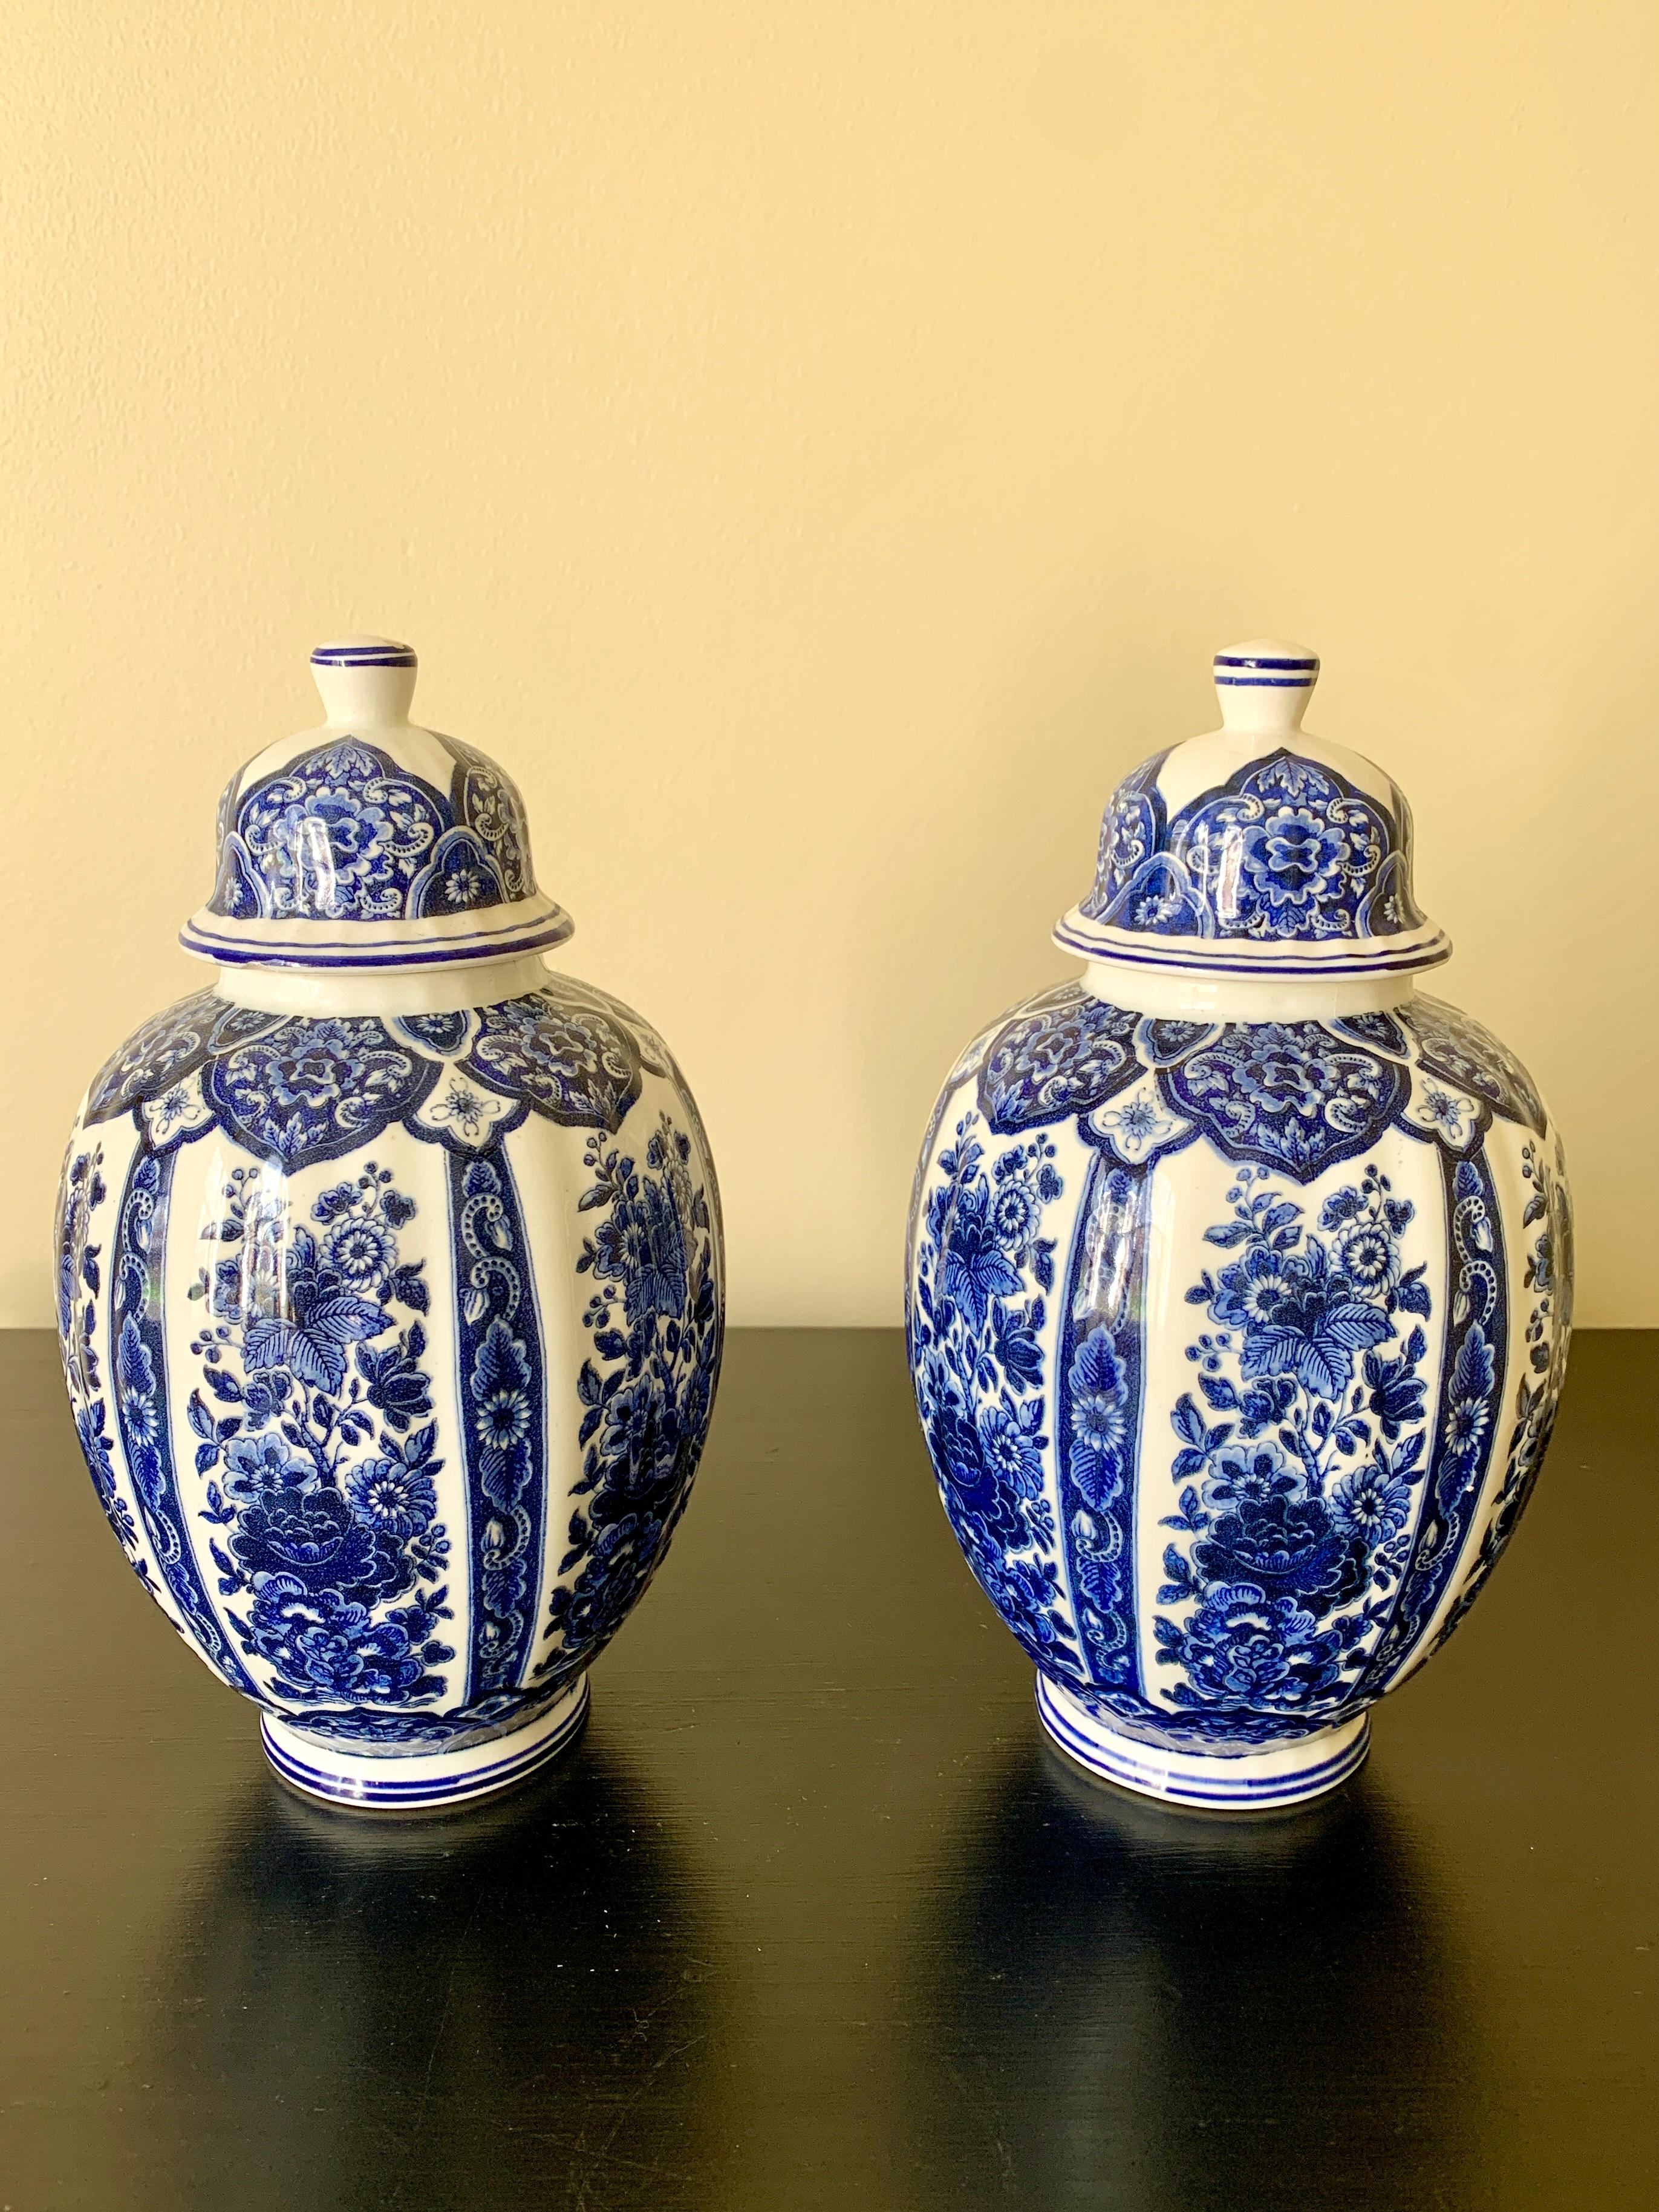 A pair of beautiful Italian blue and white porcelain covered ginger jars

By Ardalt Blue Delfia

Italy, Mid-20th Century

Measures: 5.25ʺW × 5.25ʺD × 9.5ʺH.

Good vintage condition. Minor wear including small chips to one lid and small repaired